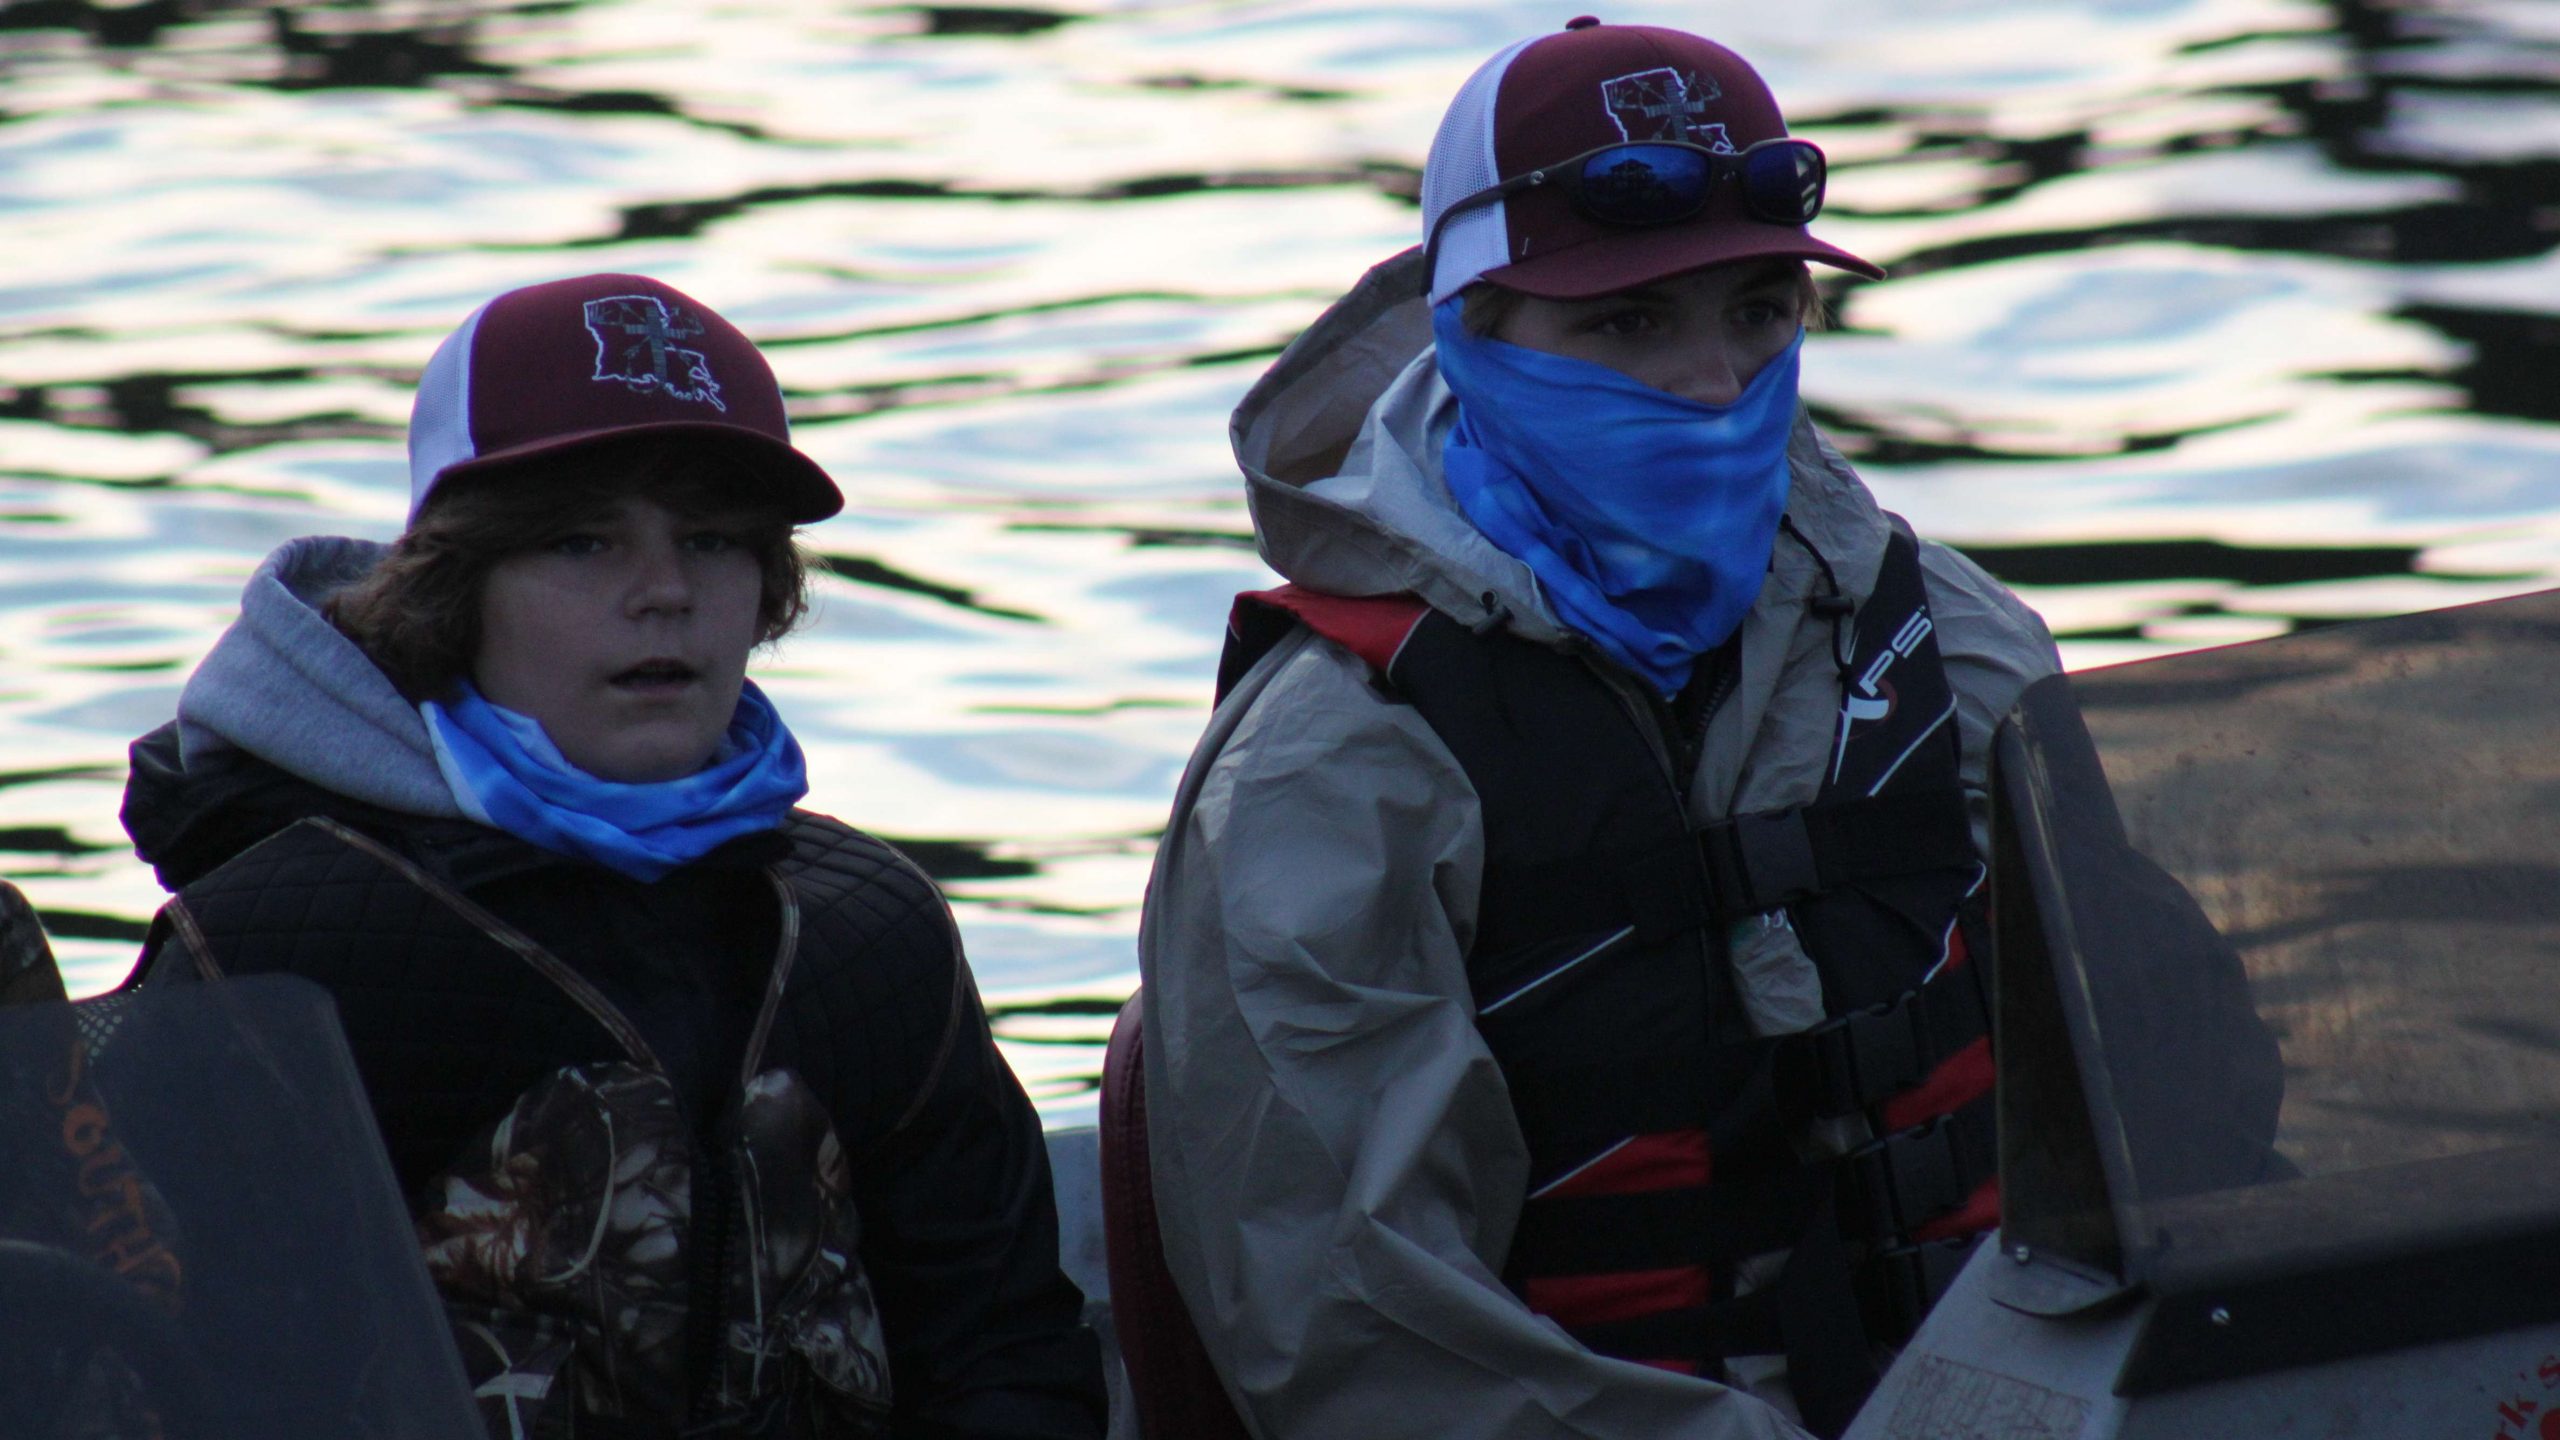 Logan Guy and Micah Hubbard get ready to shoot out into the morning.
